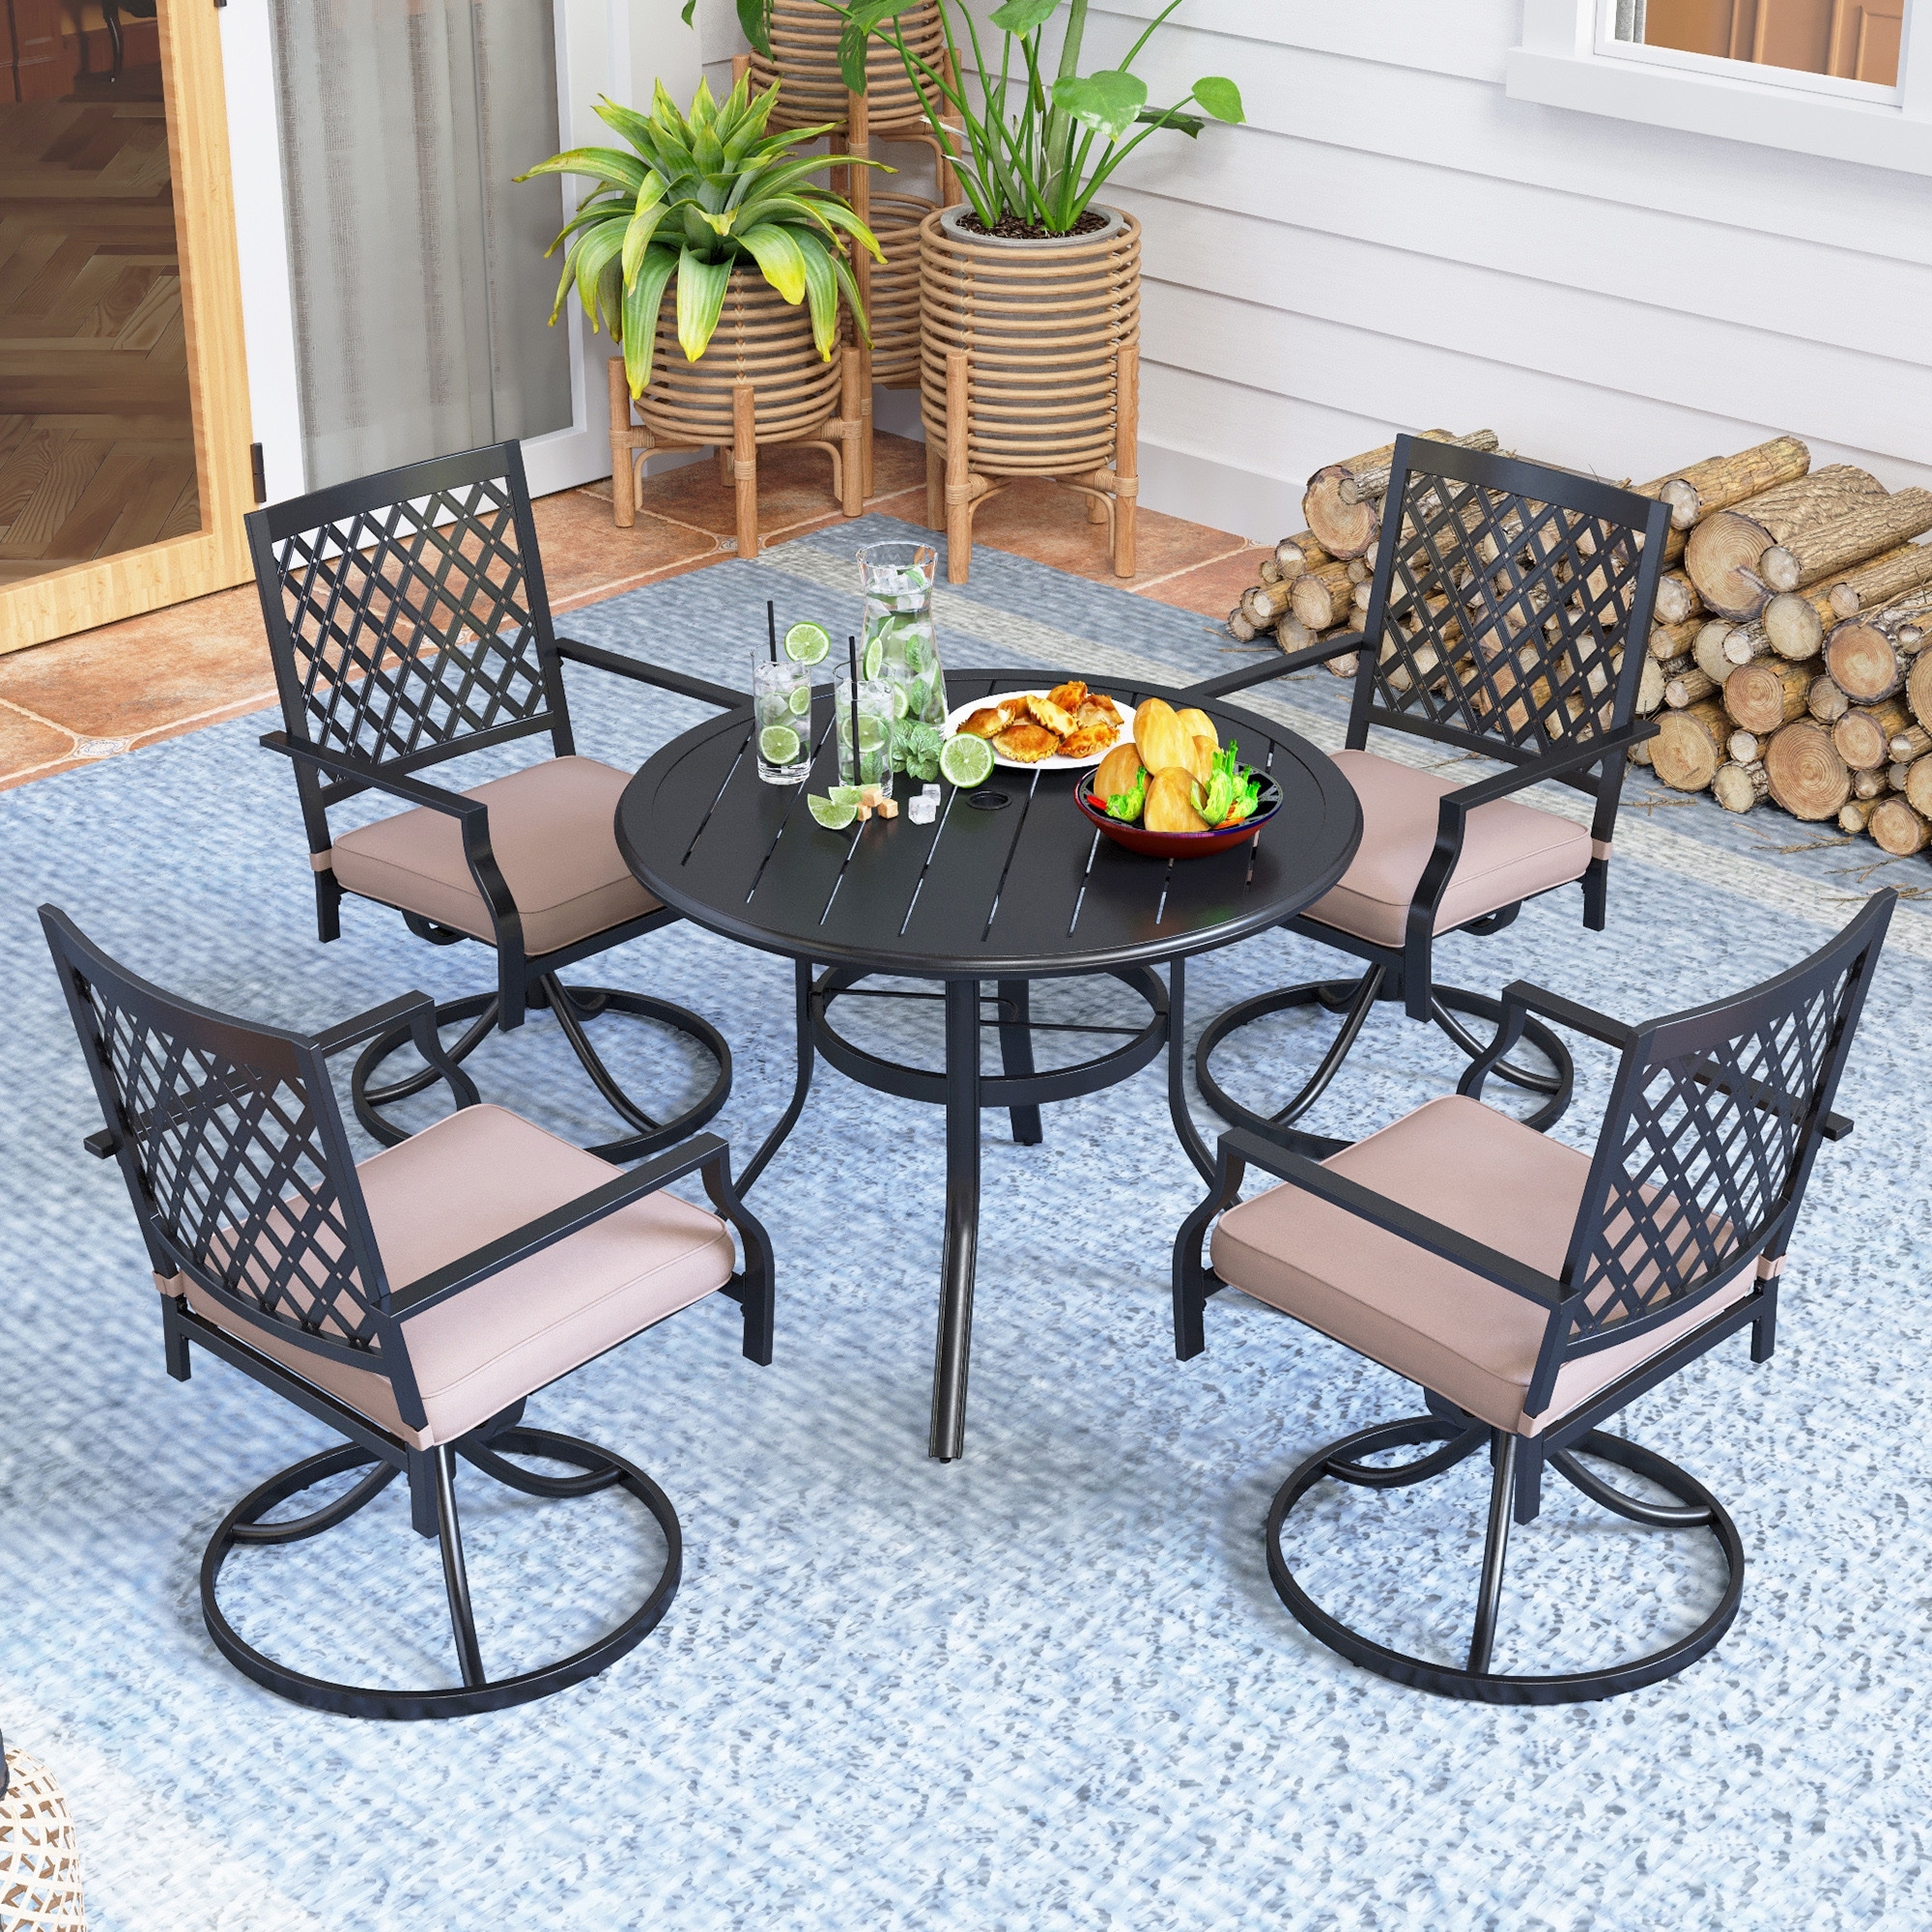 Mfstudio 5 Piece Outdoor Patio Dining Set  4 Swivel Armrest Chairs With Cushions And 37.8 Round Table With 1.57 Umbrella Hole